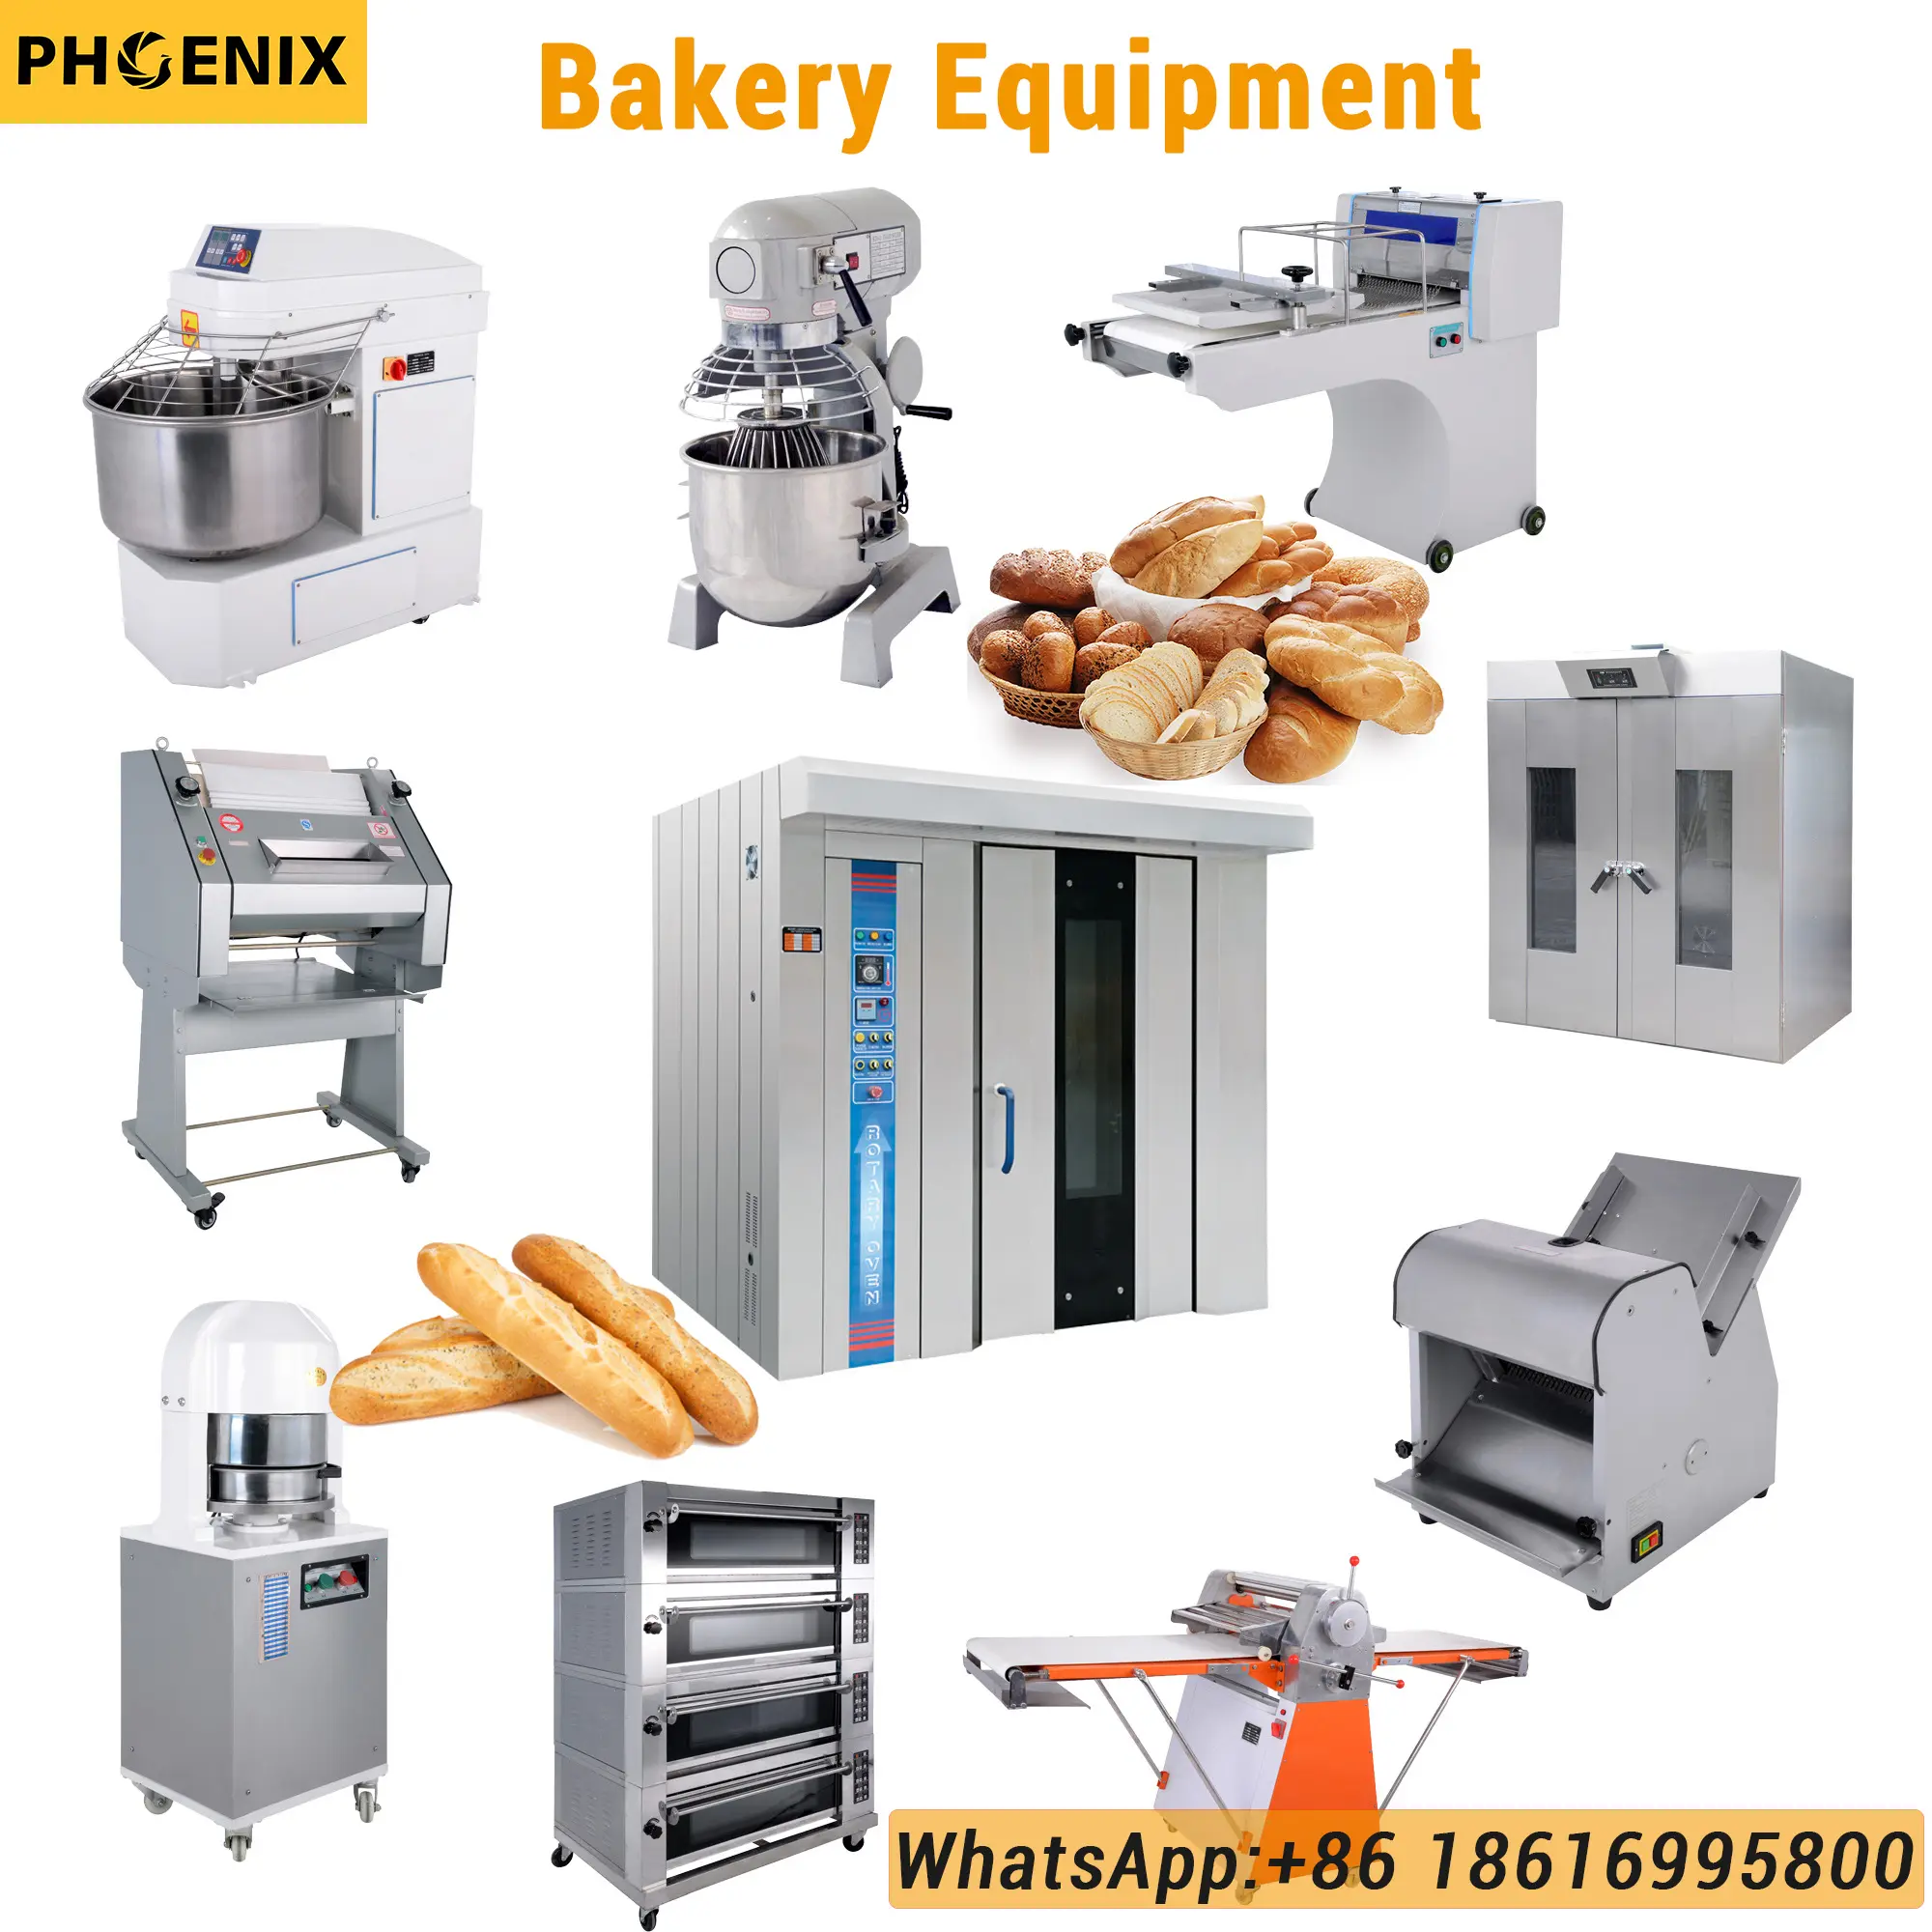 Supply whole bakery line oven mixer Industrial bread making machines Commercial Bakery Baking Equipment